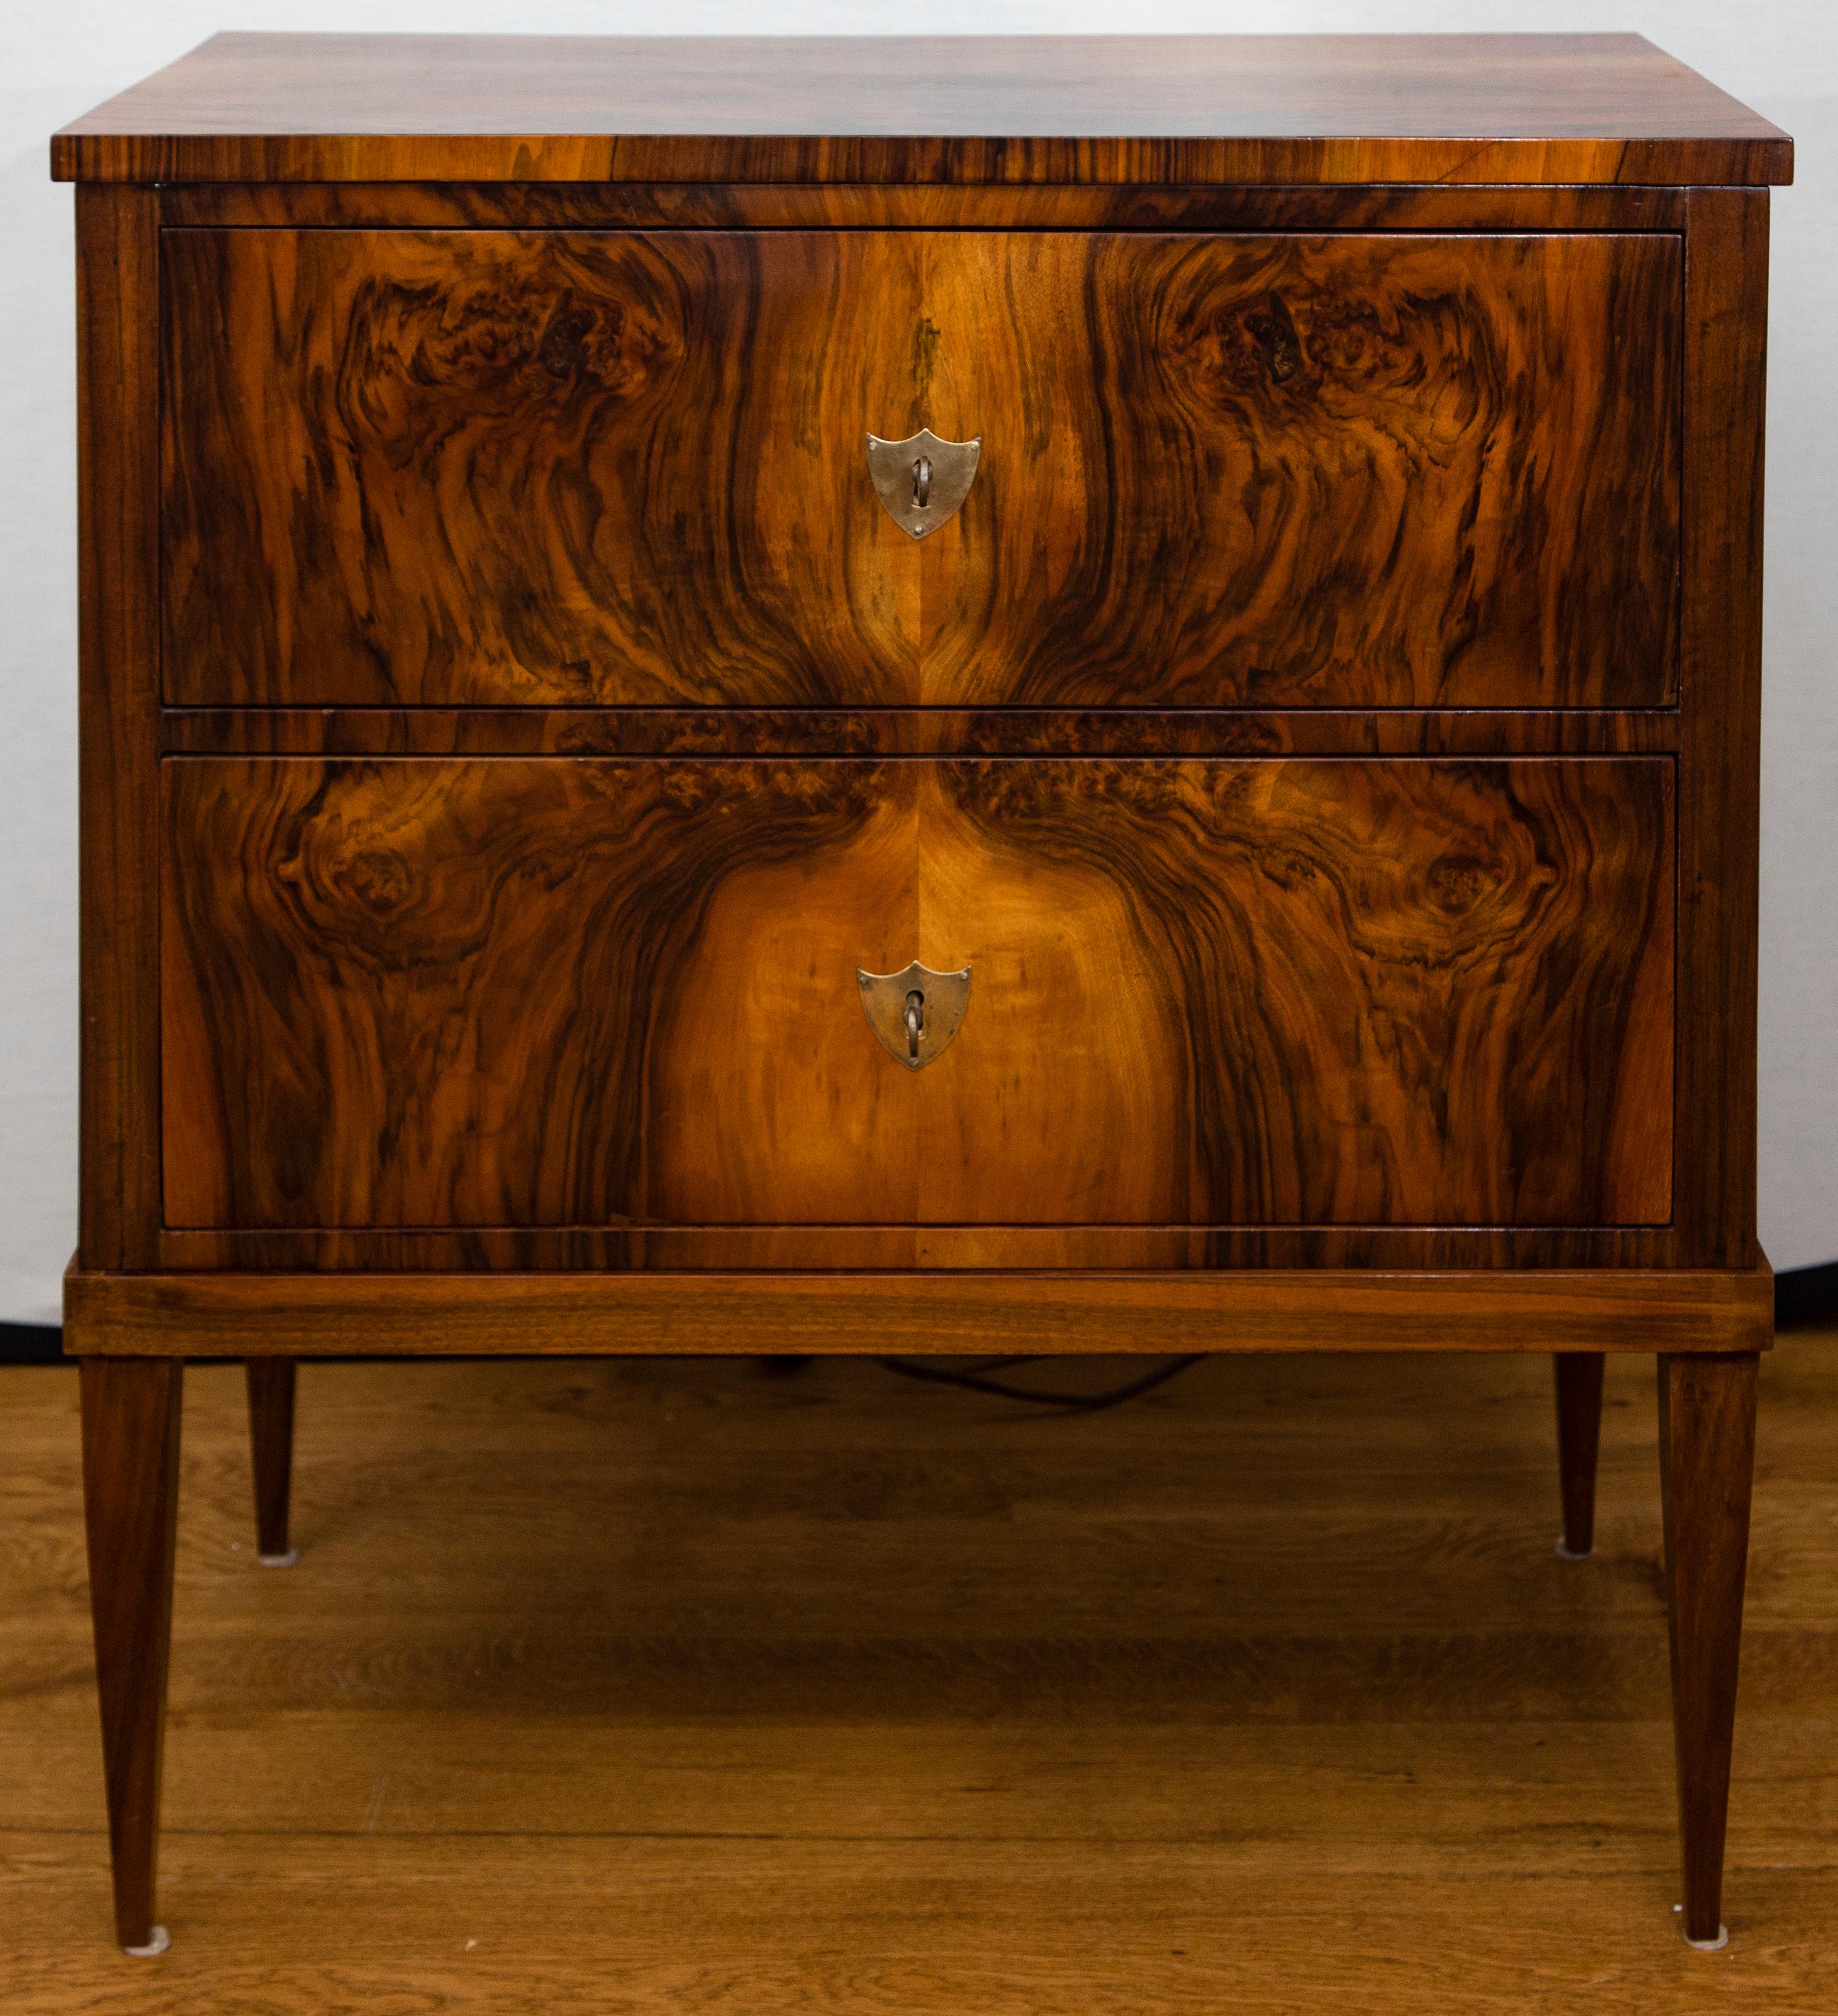 Smaller 19th century two drawer chest of drawers finishing on high tapered legs with shield-shaped brass escutcheons in a lovely patterned book-matched walnut veneer on pine.
Dating: 1840ca
Origin: Germany
Condition: Excellent restored condition